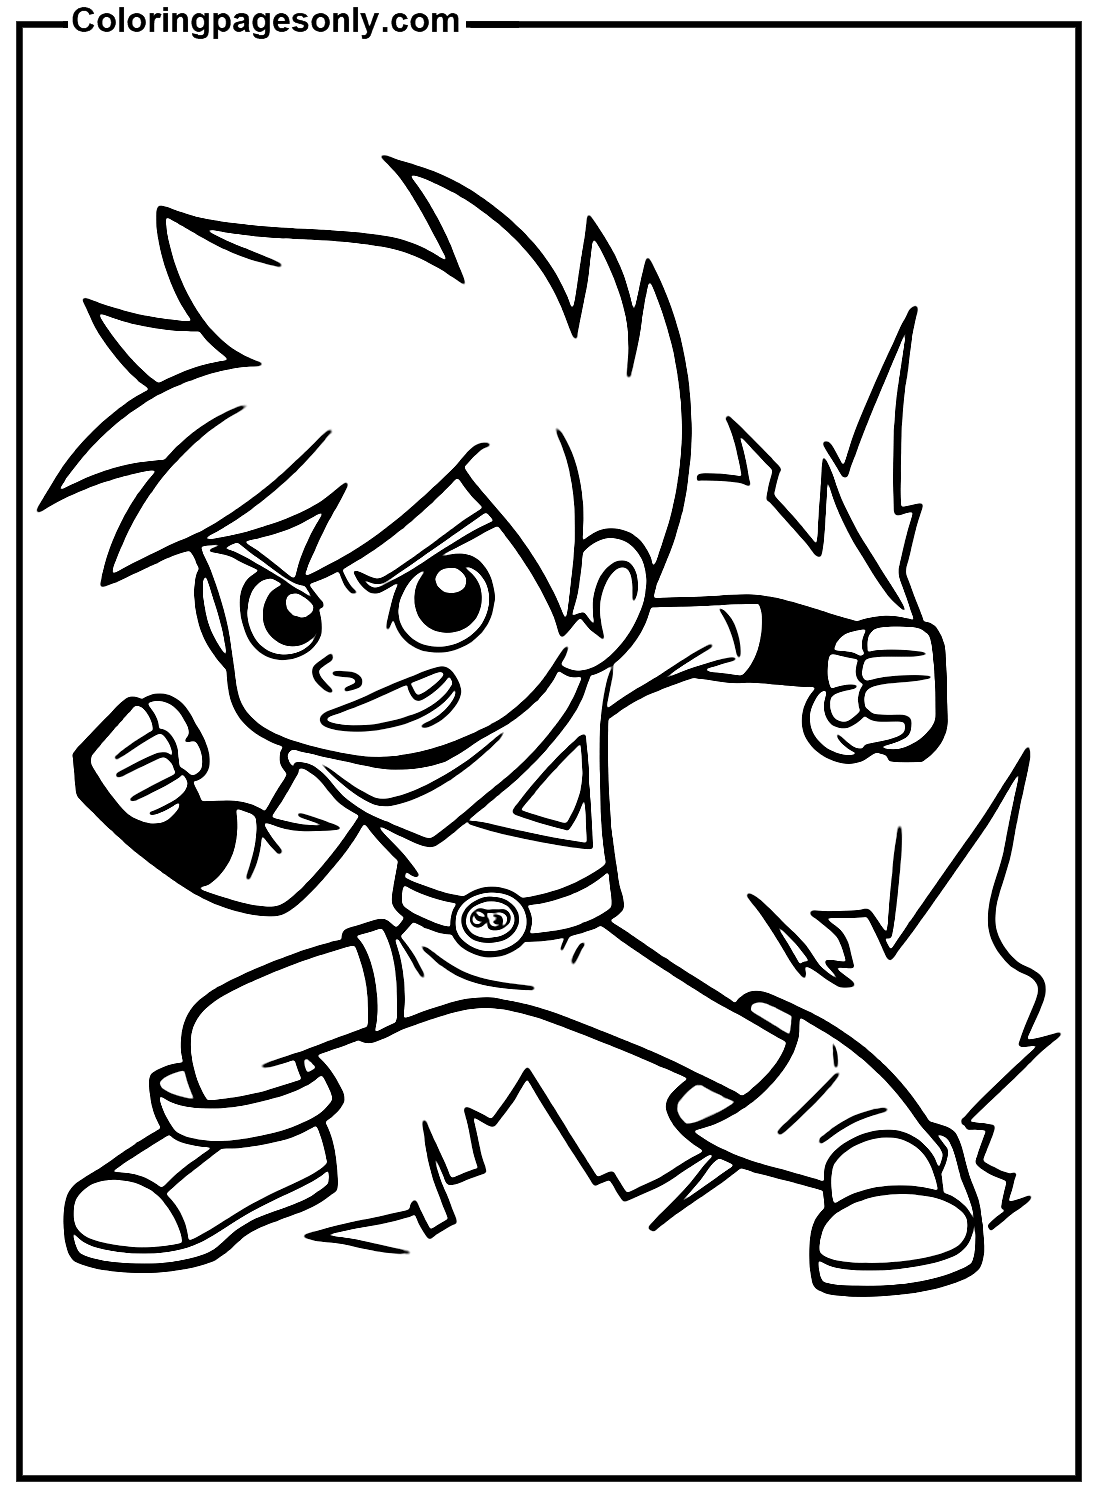 Cute Danny Phantom Image Coloring Pages